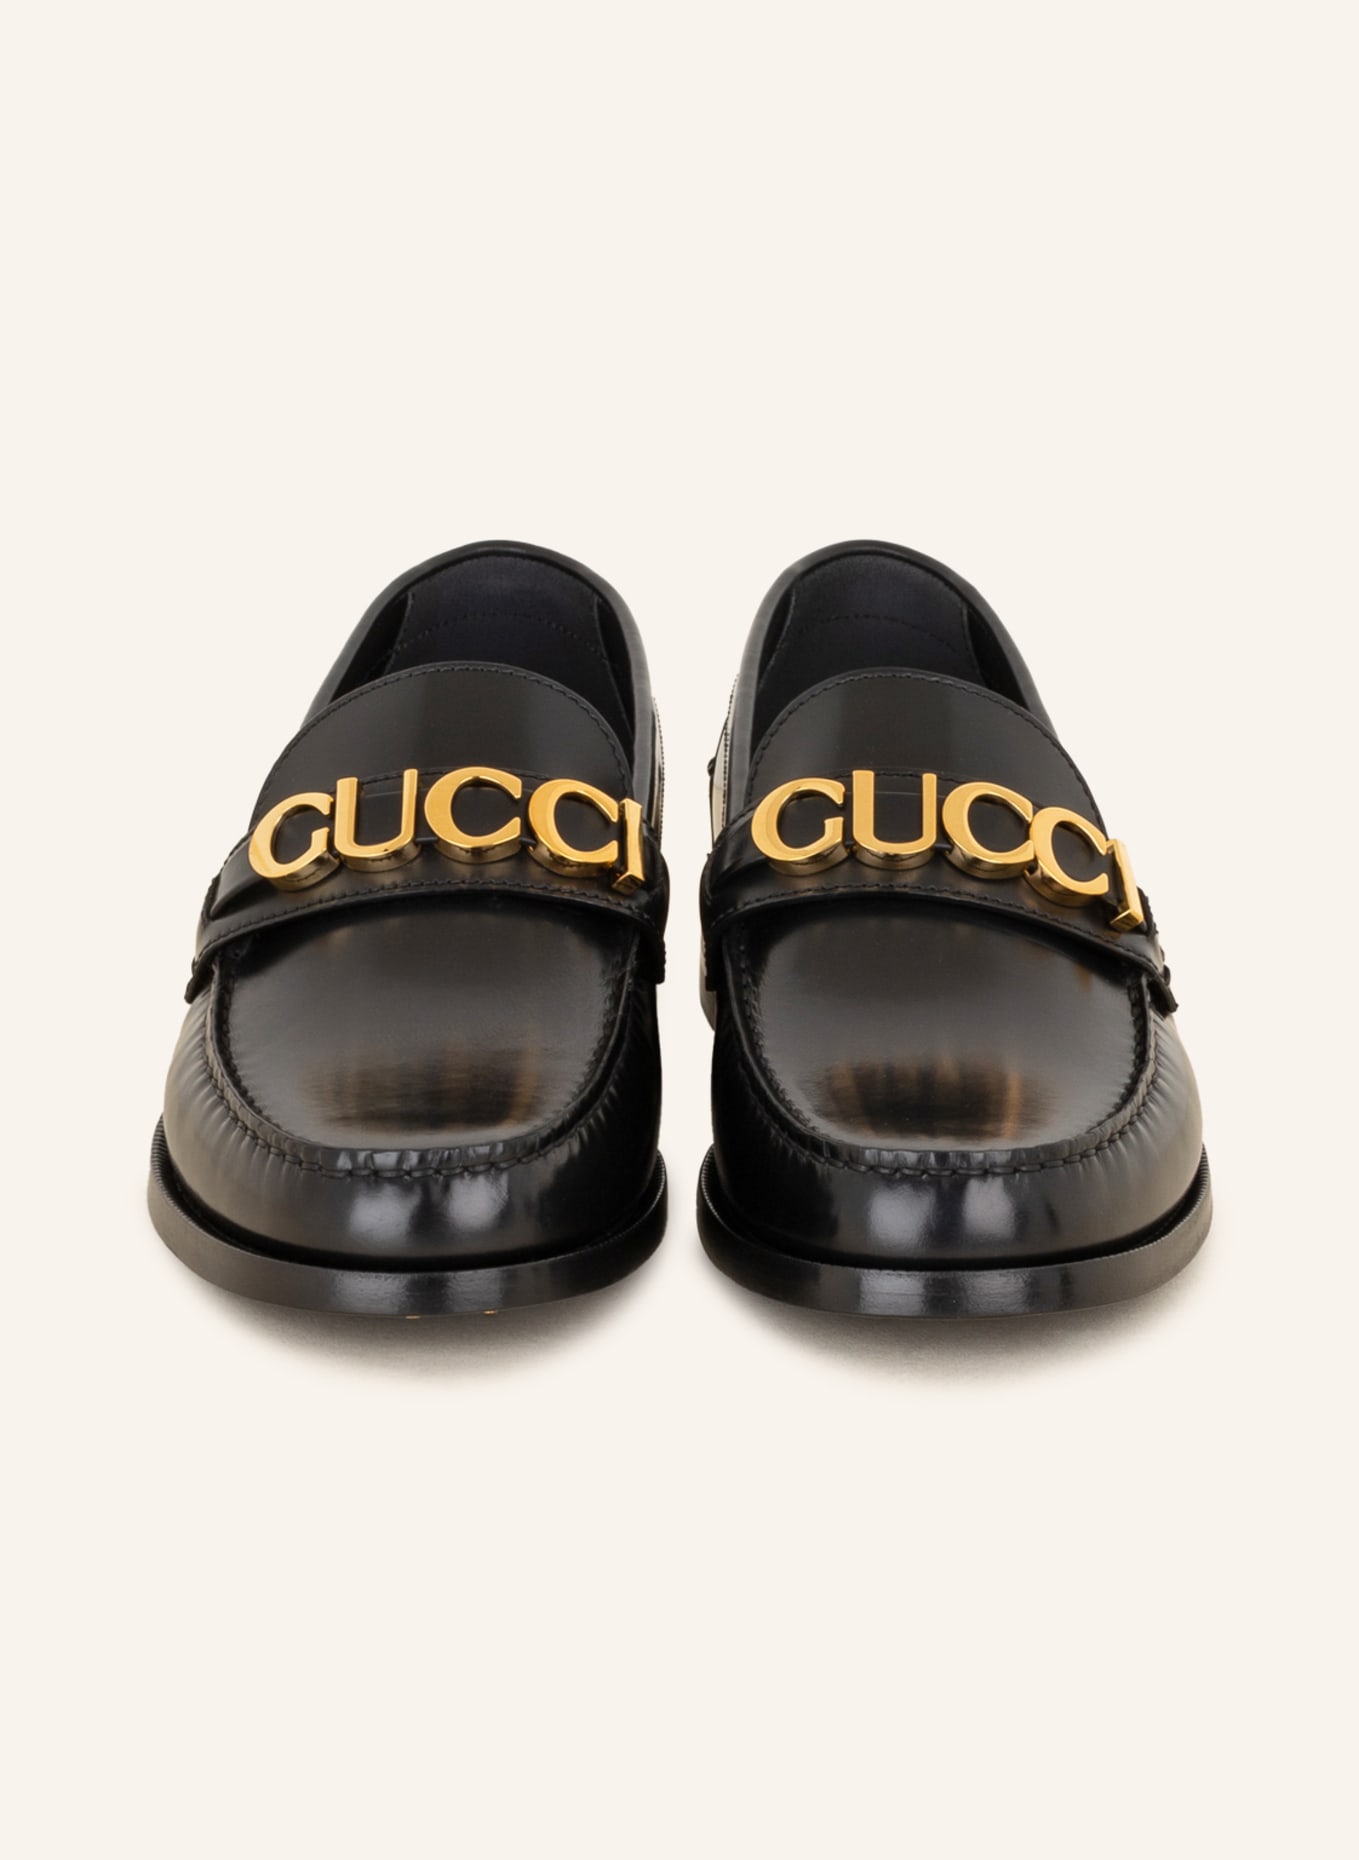 GUCCI Loafers MILLENIAL RIBOT in black